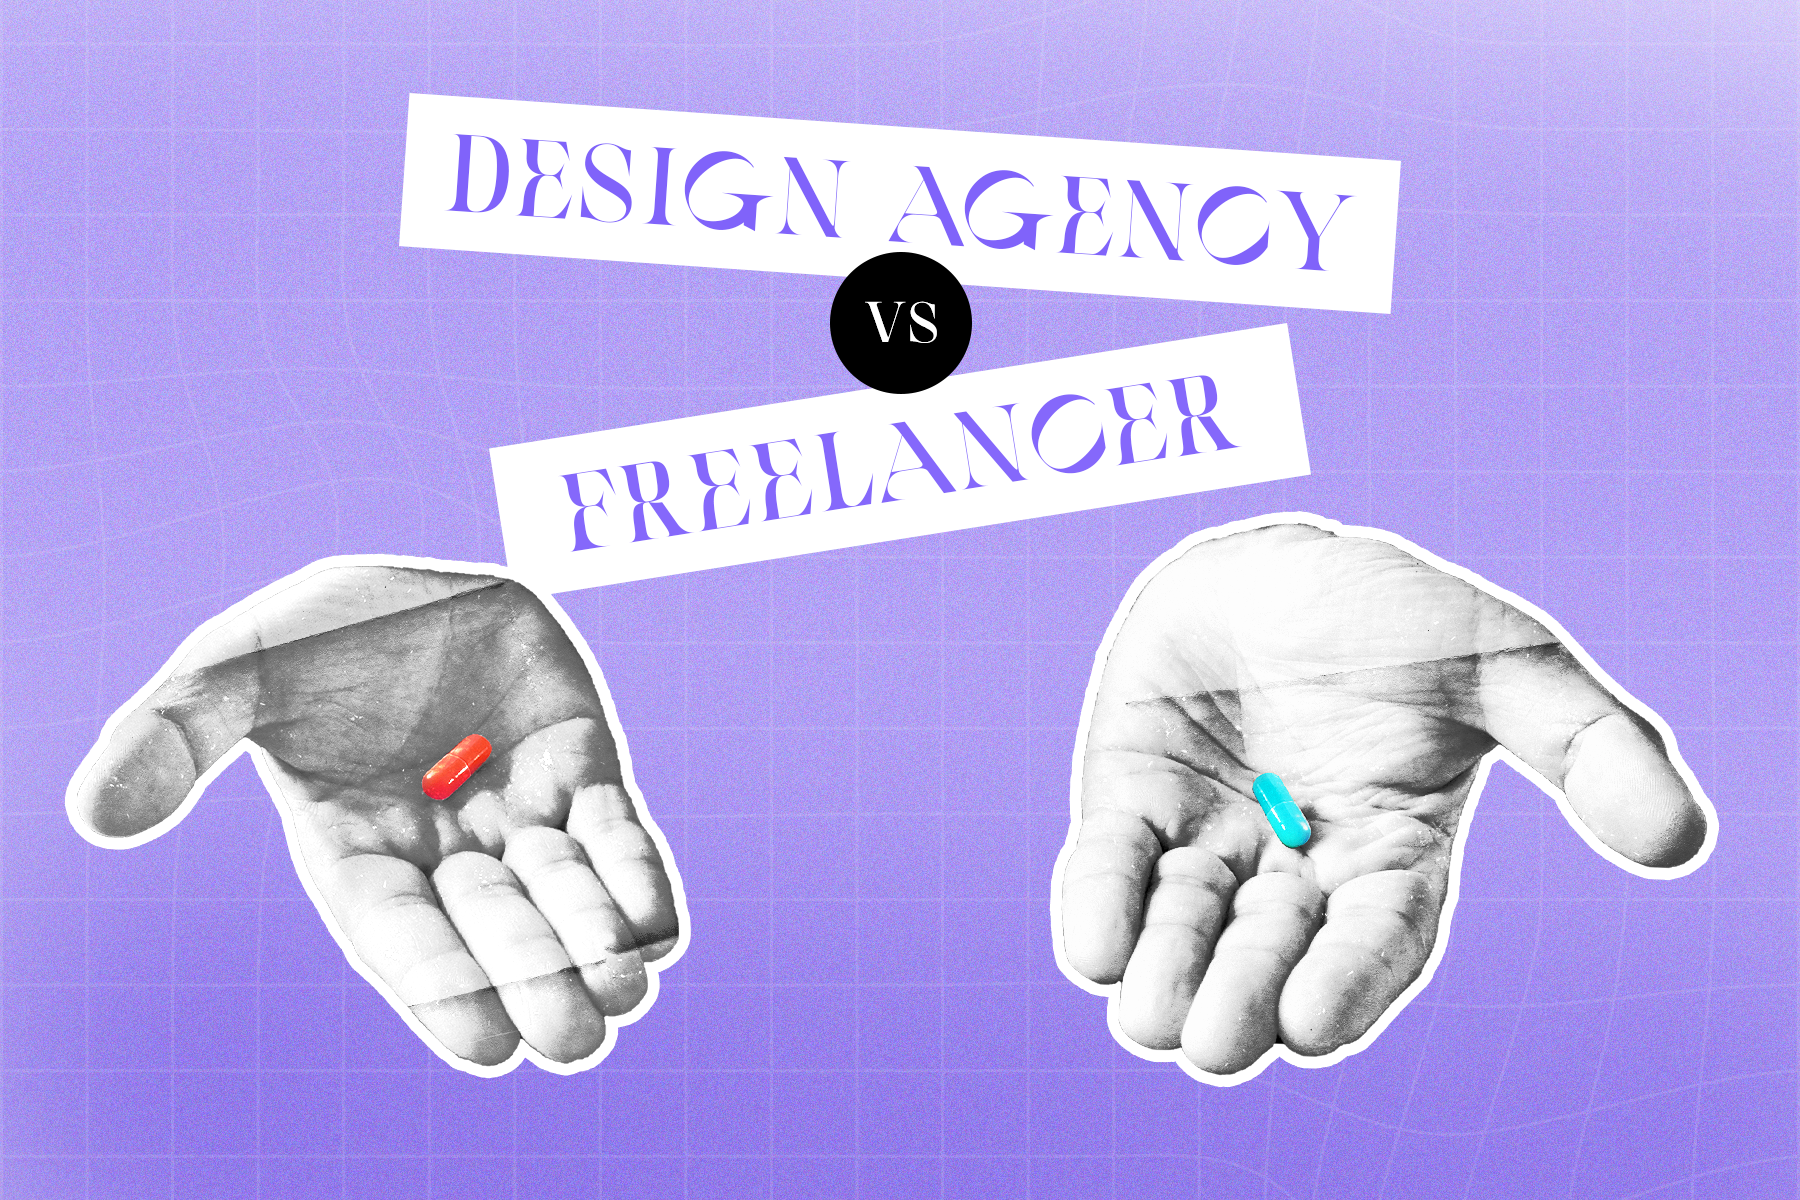 Two hands with pills and the text Design Agency vs Freelancer